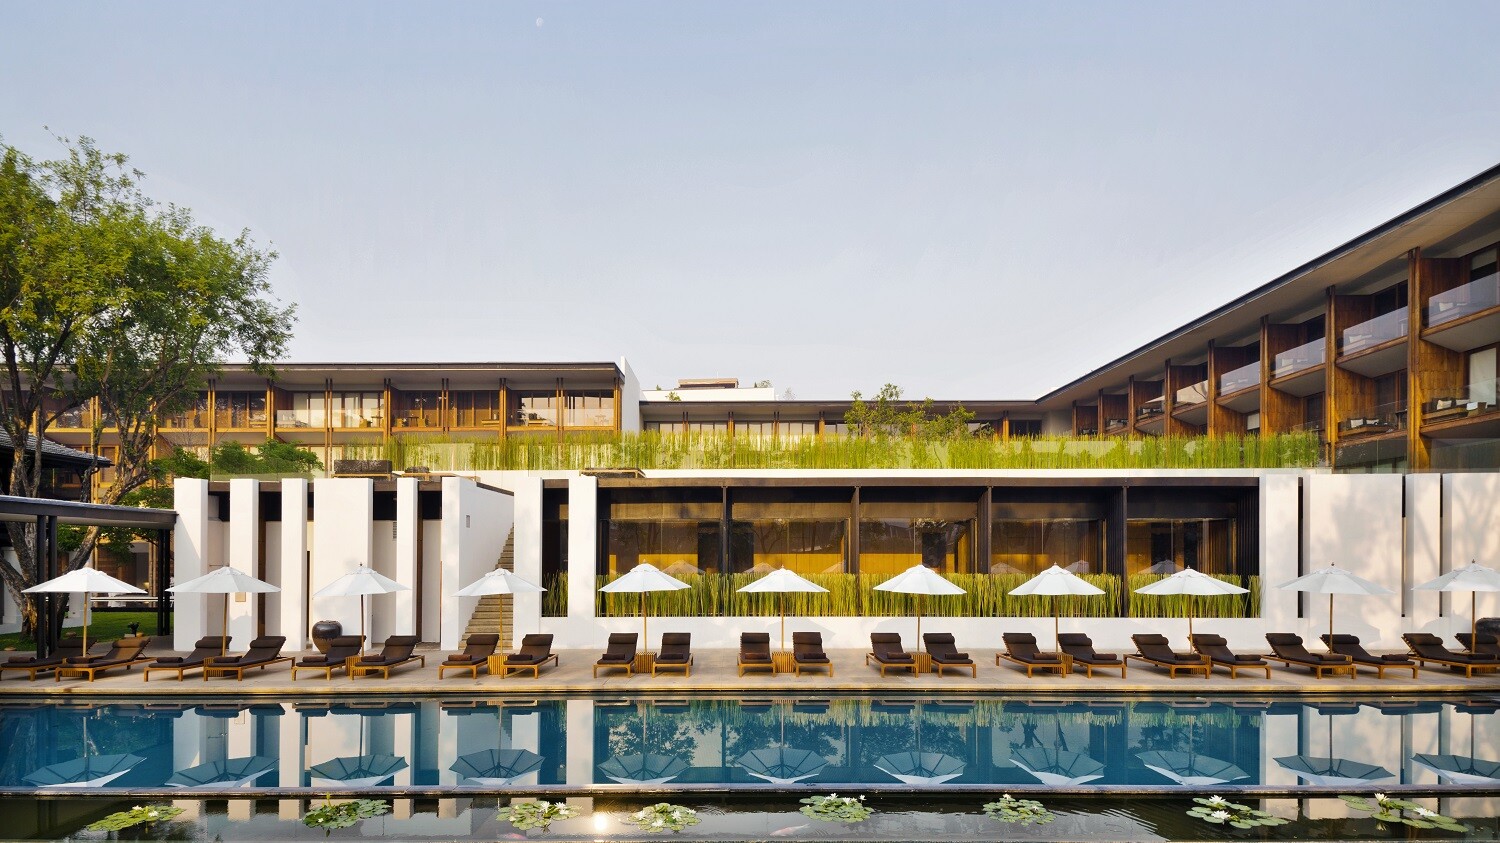 Anantara Chiang Mai Resort Wraps Up Challenging Year on Top of the World